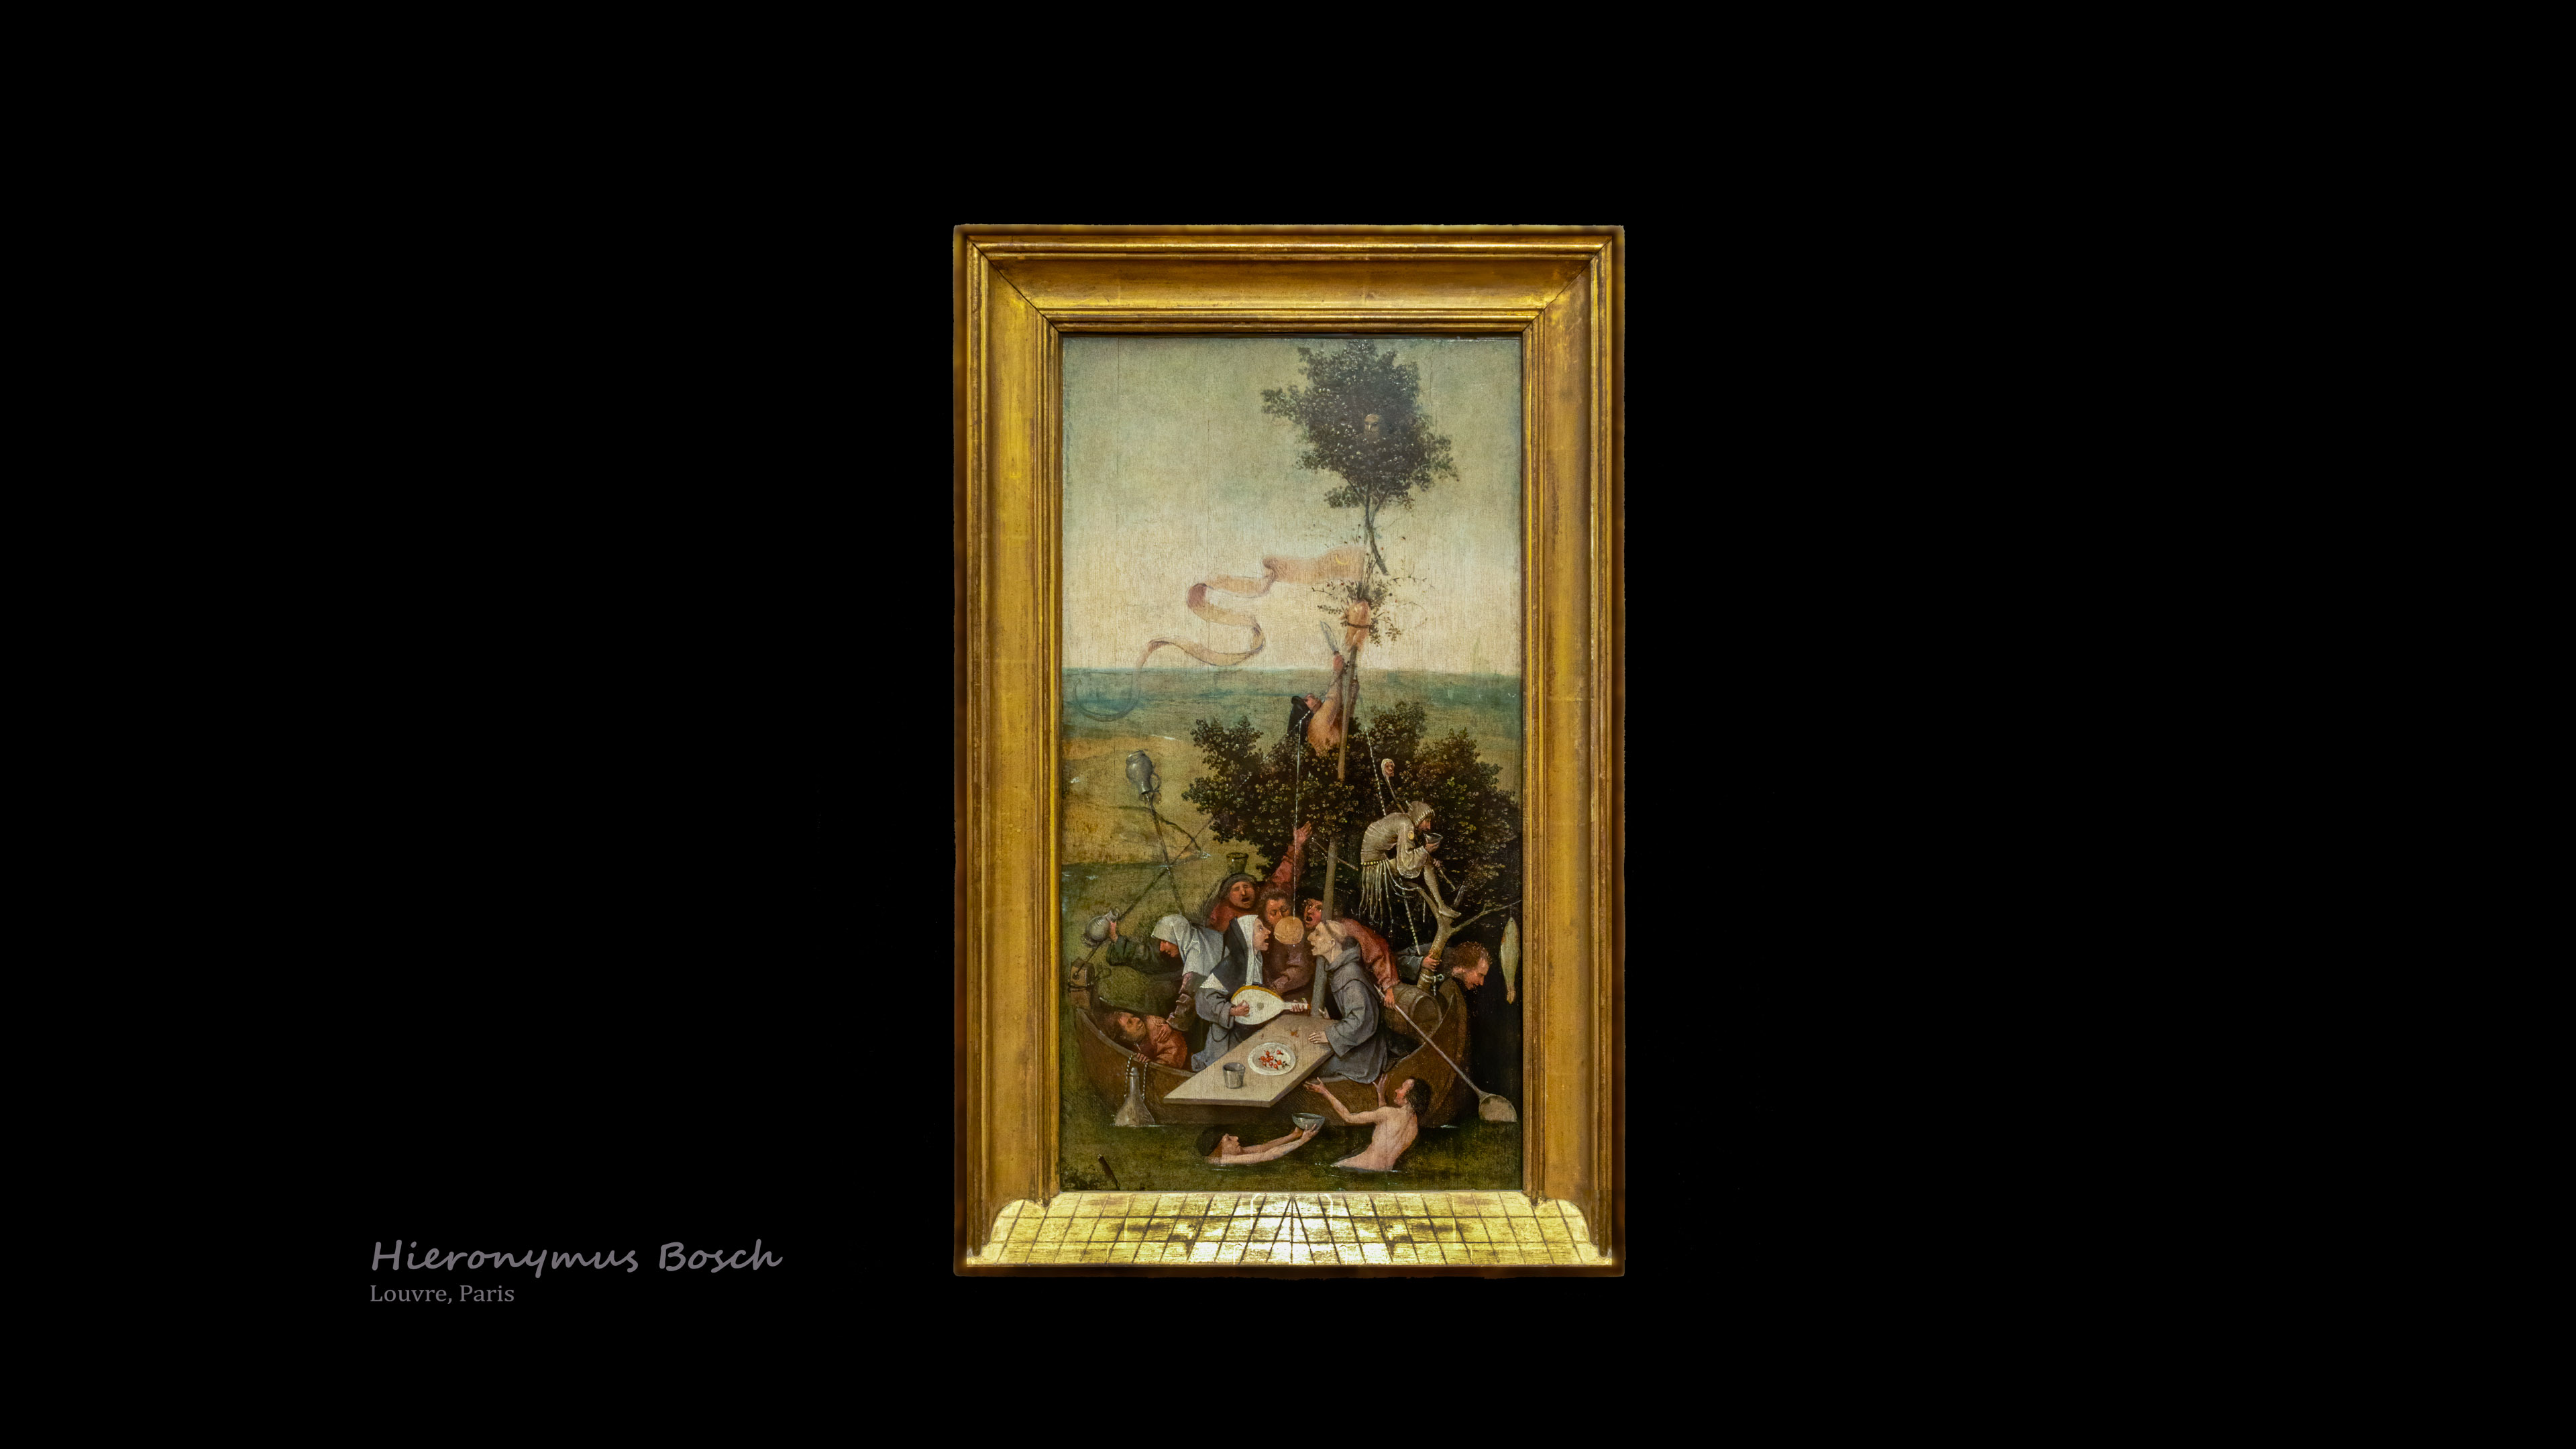 Enter a realm of mystery and symbolism as Bosch's paintings grace your PC screen.